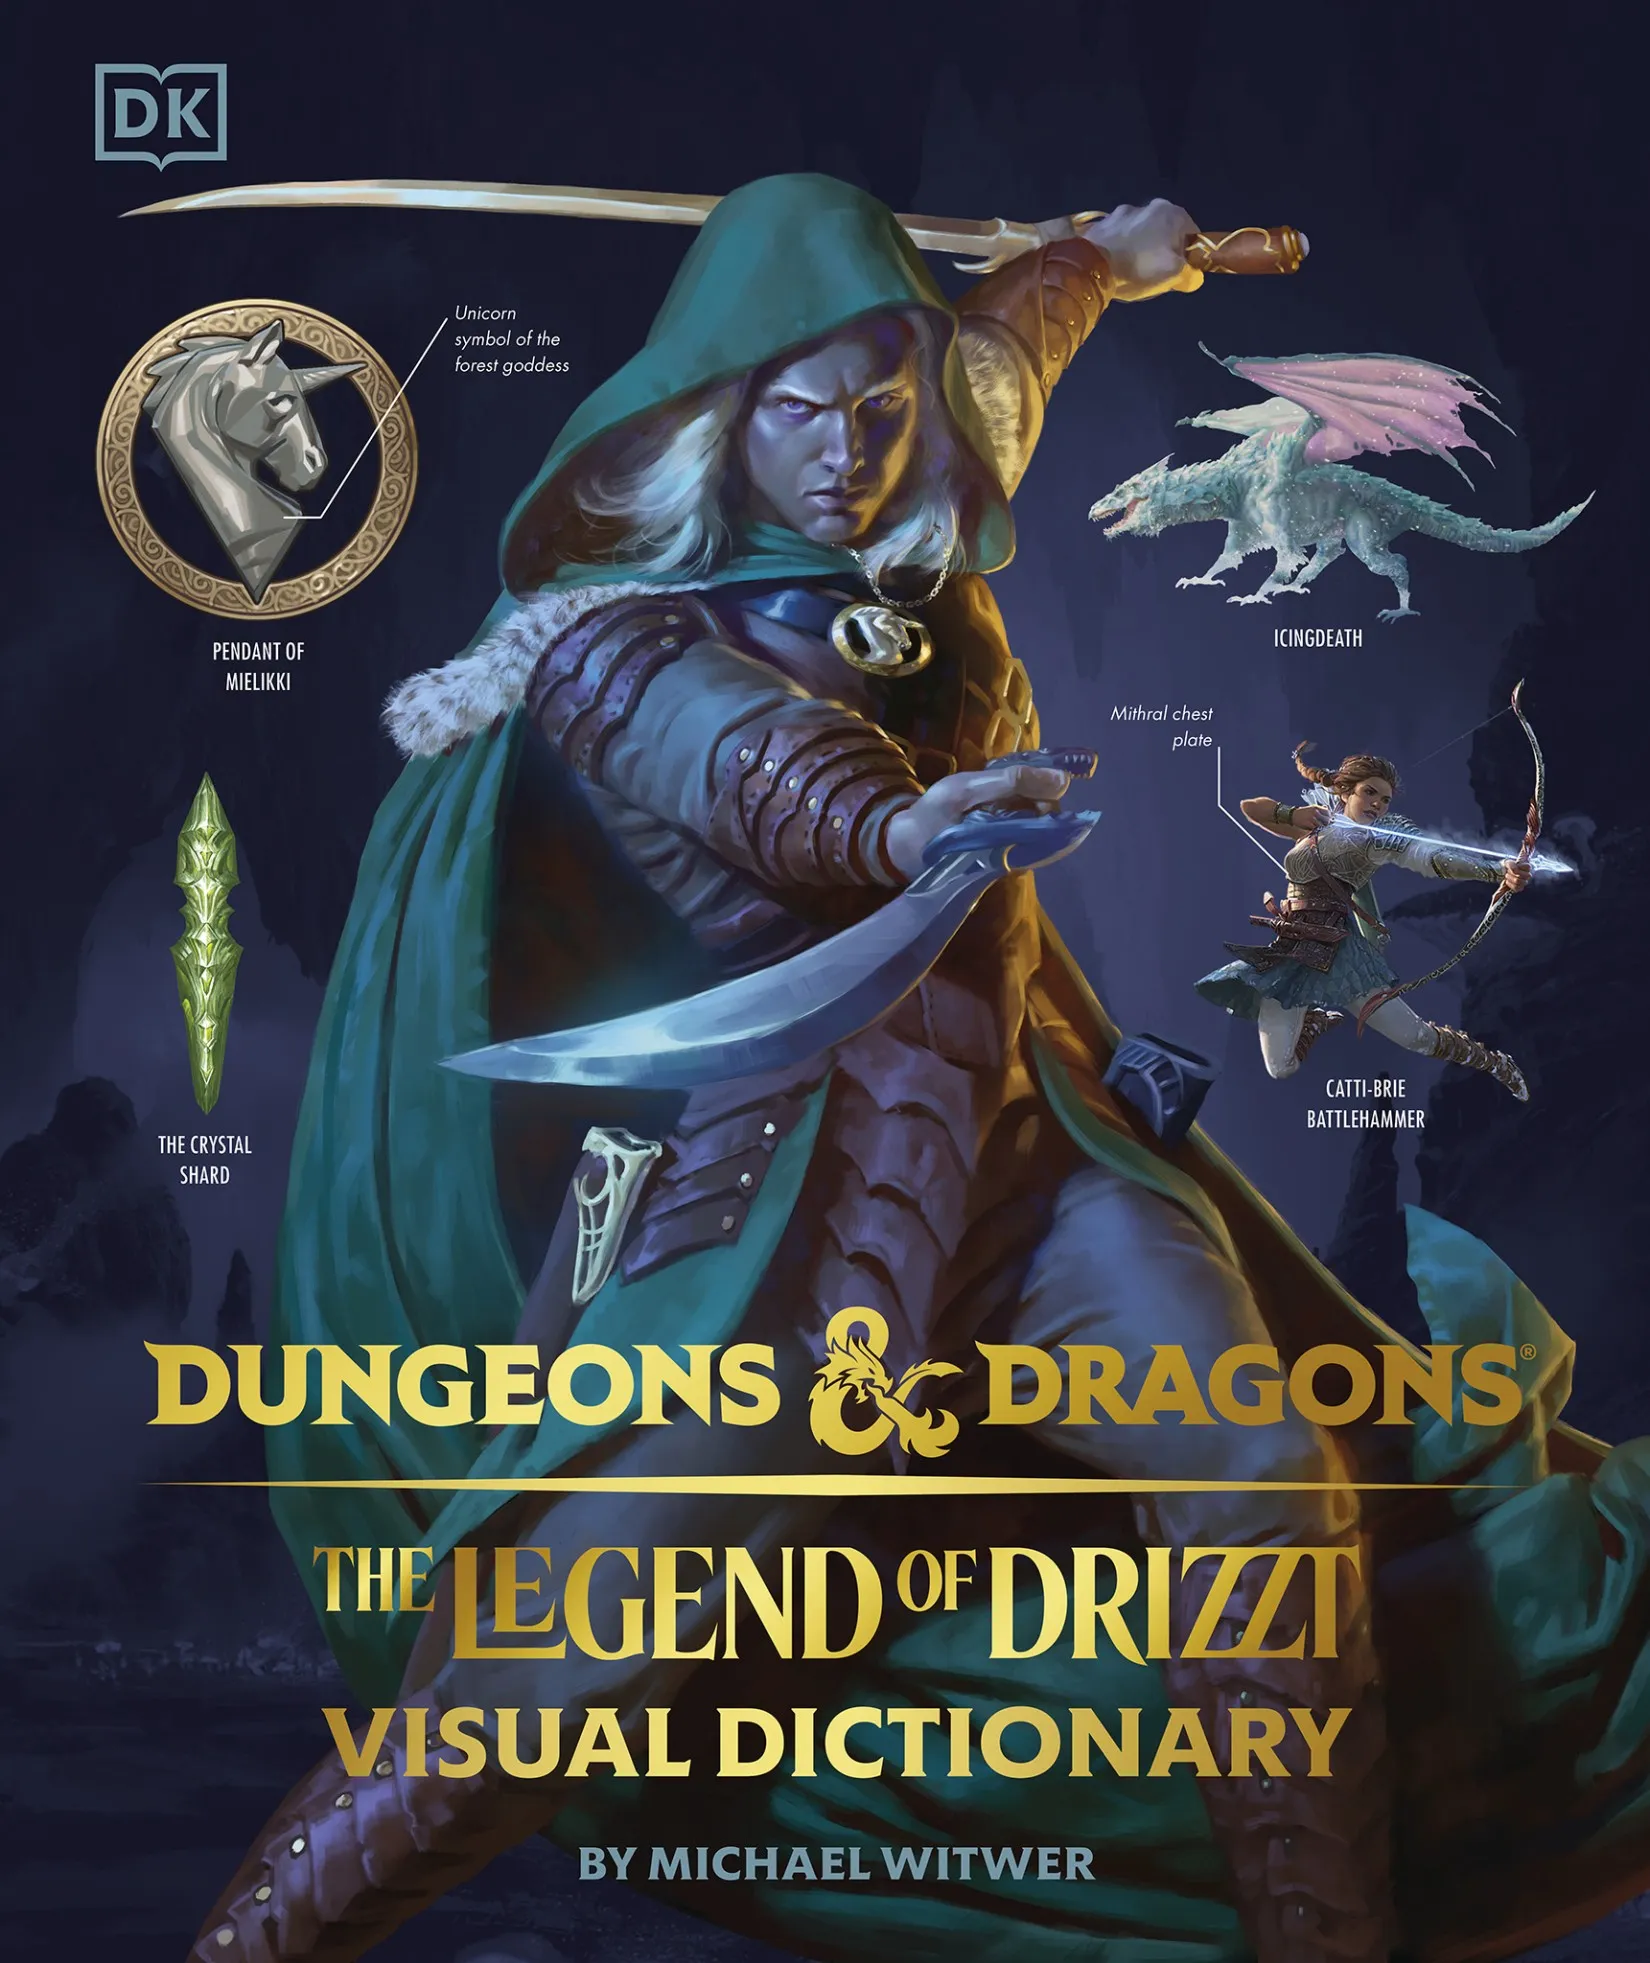 Dungeons & Dragons The Legend of Drizzt Visual Dictionary (The Legend of Drizzt)